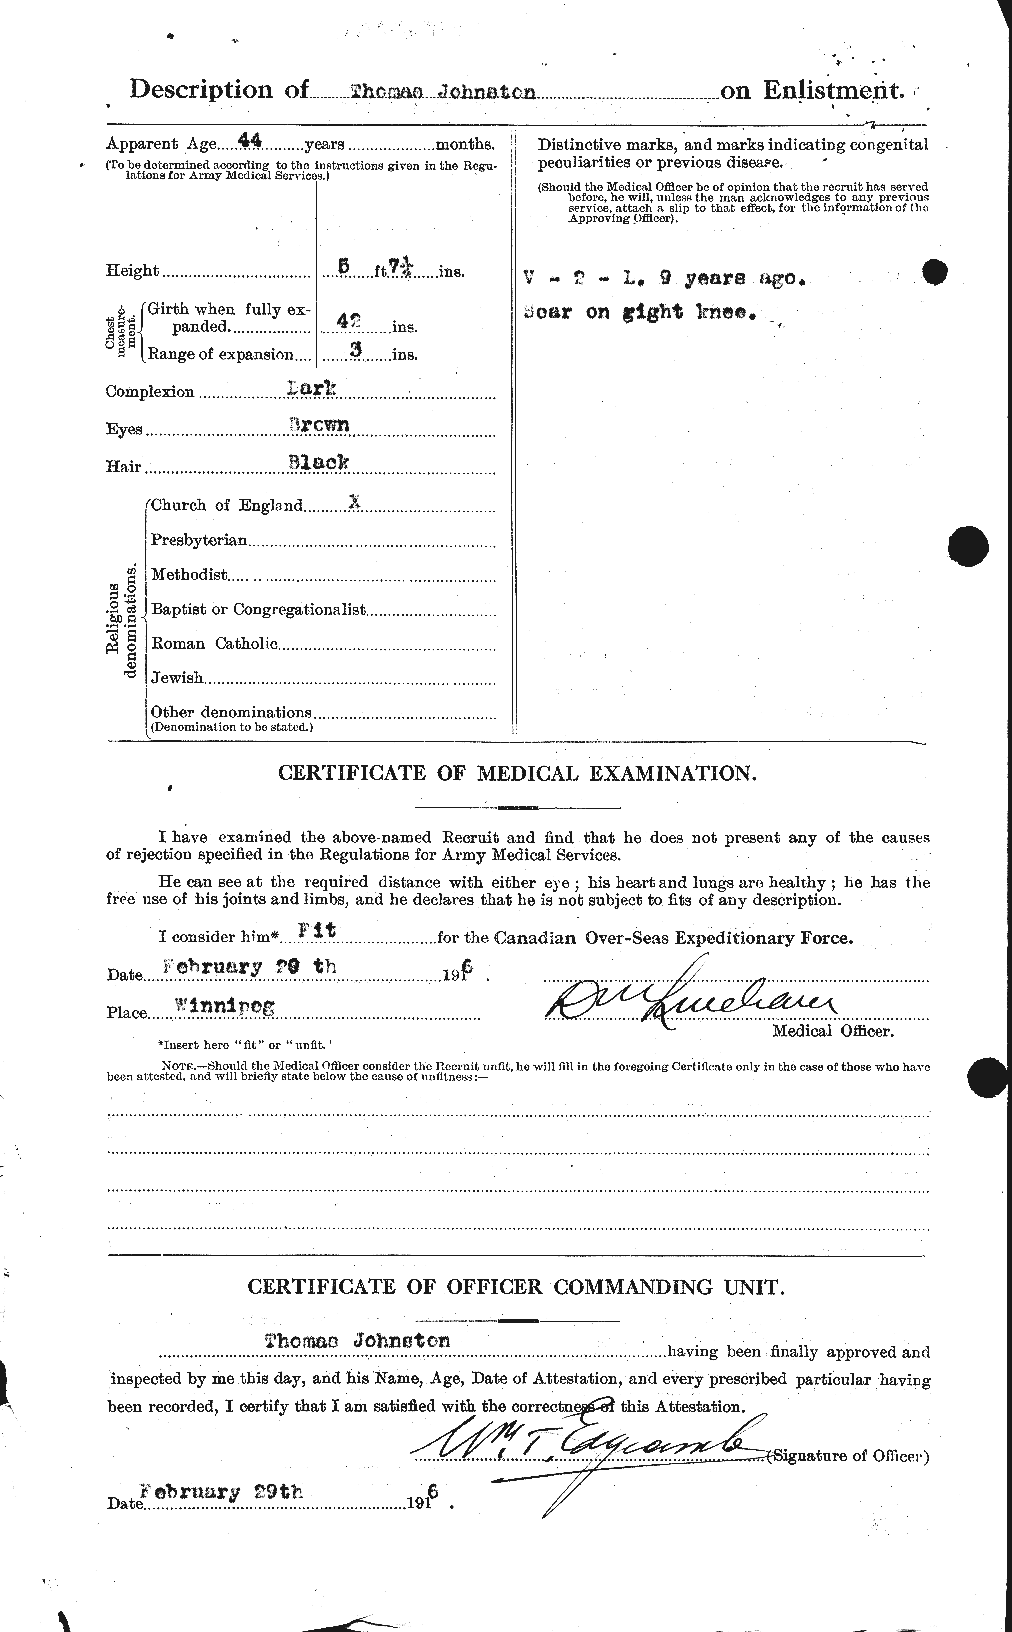 Personnel Records of the First World War - CEF 427140b